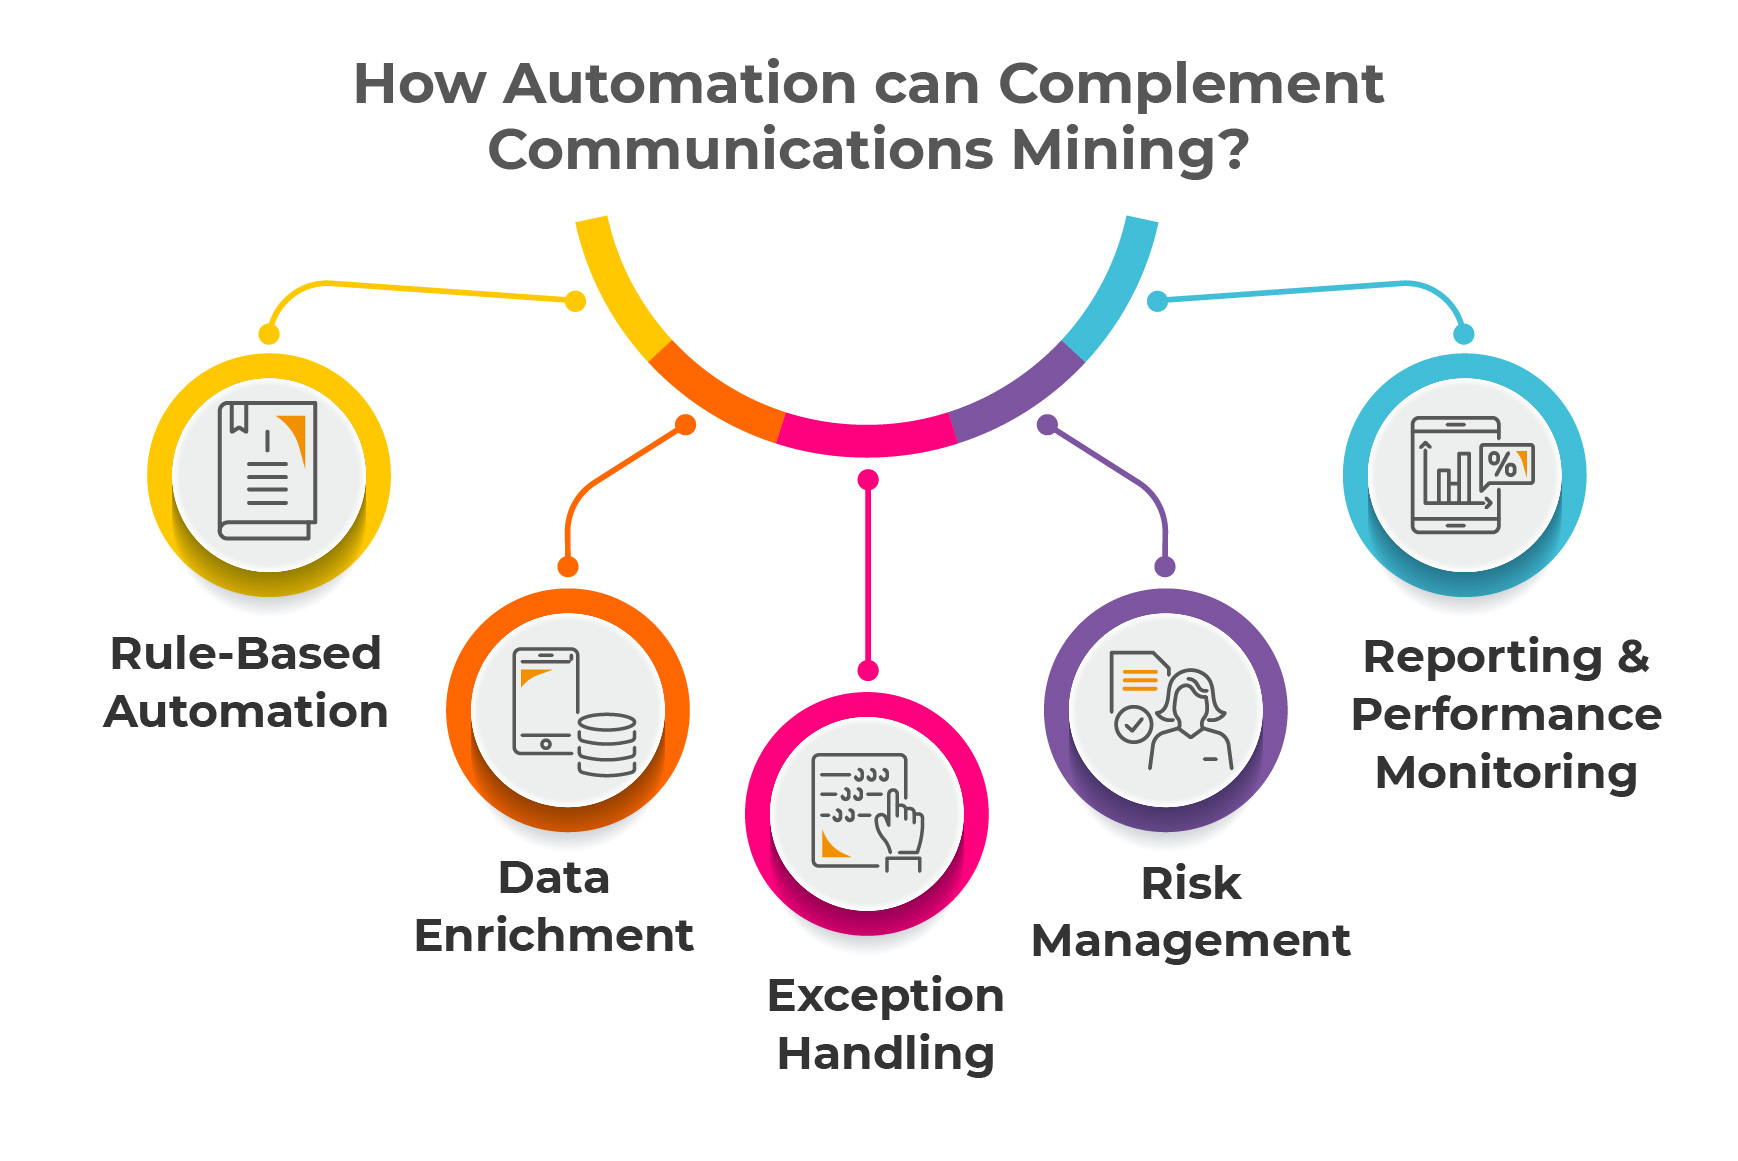 How Automation can Complement Communications Mining?